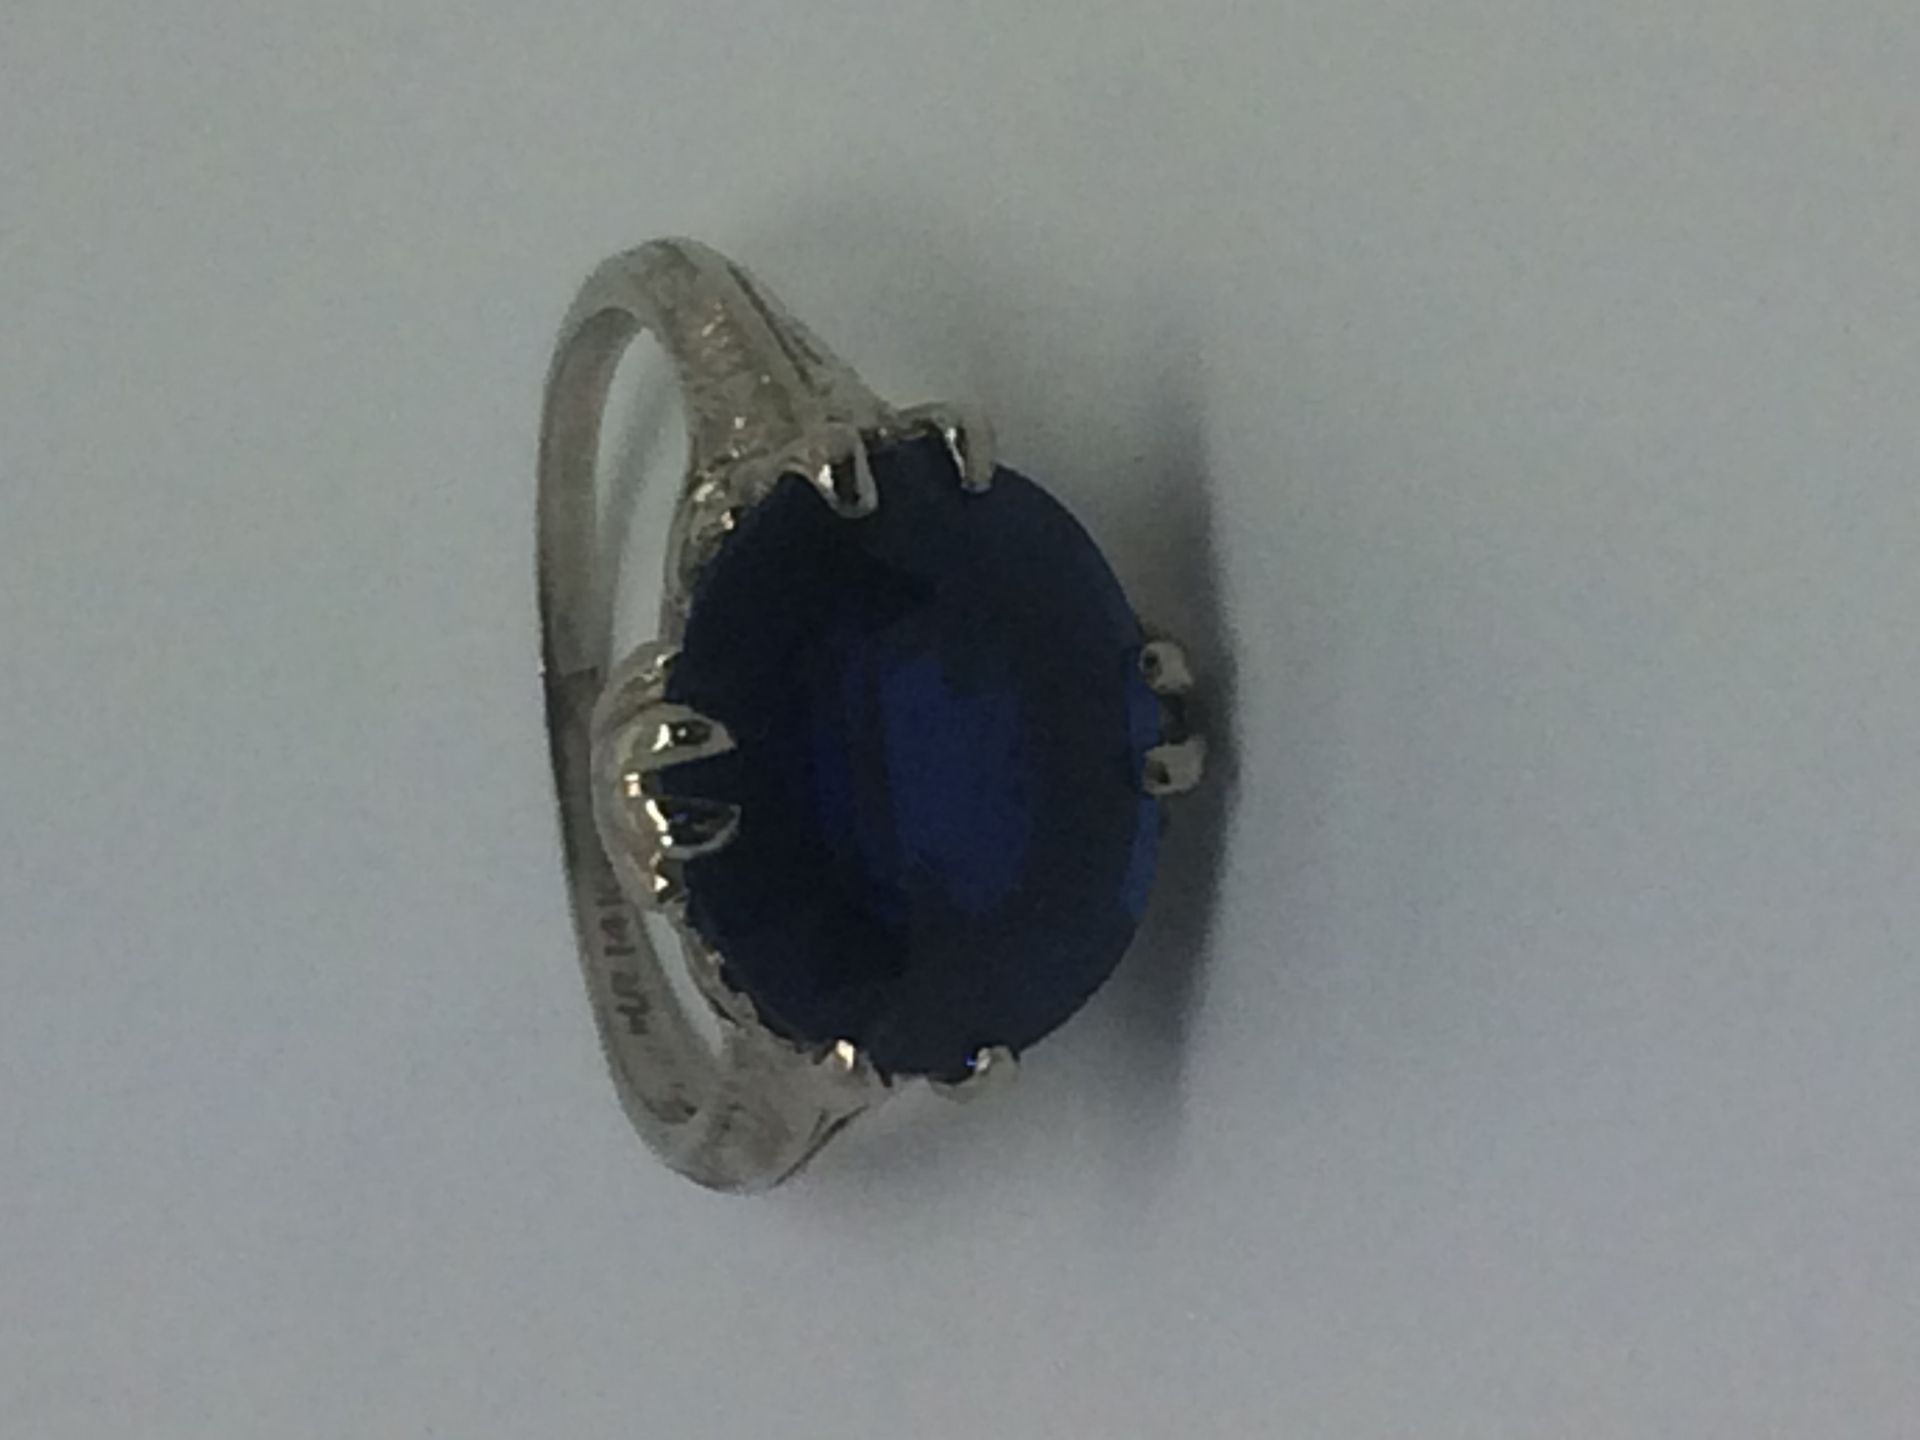 6.10 CT SAPPHIRE RING SET IN 14 CT WHITE GOLD RING - Image 2 of 6